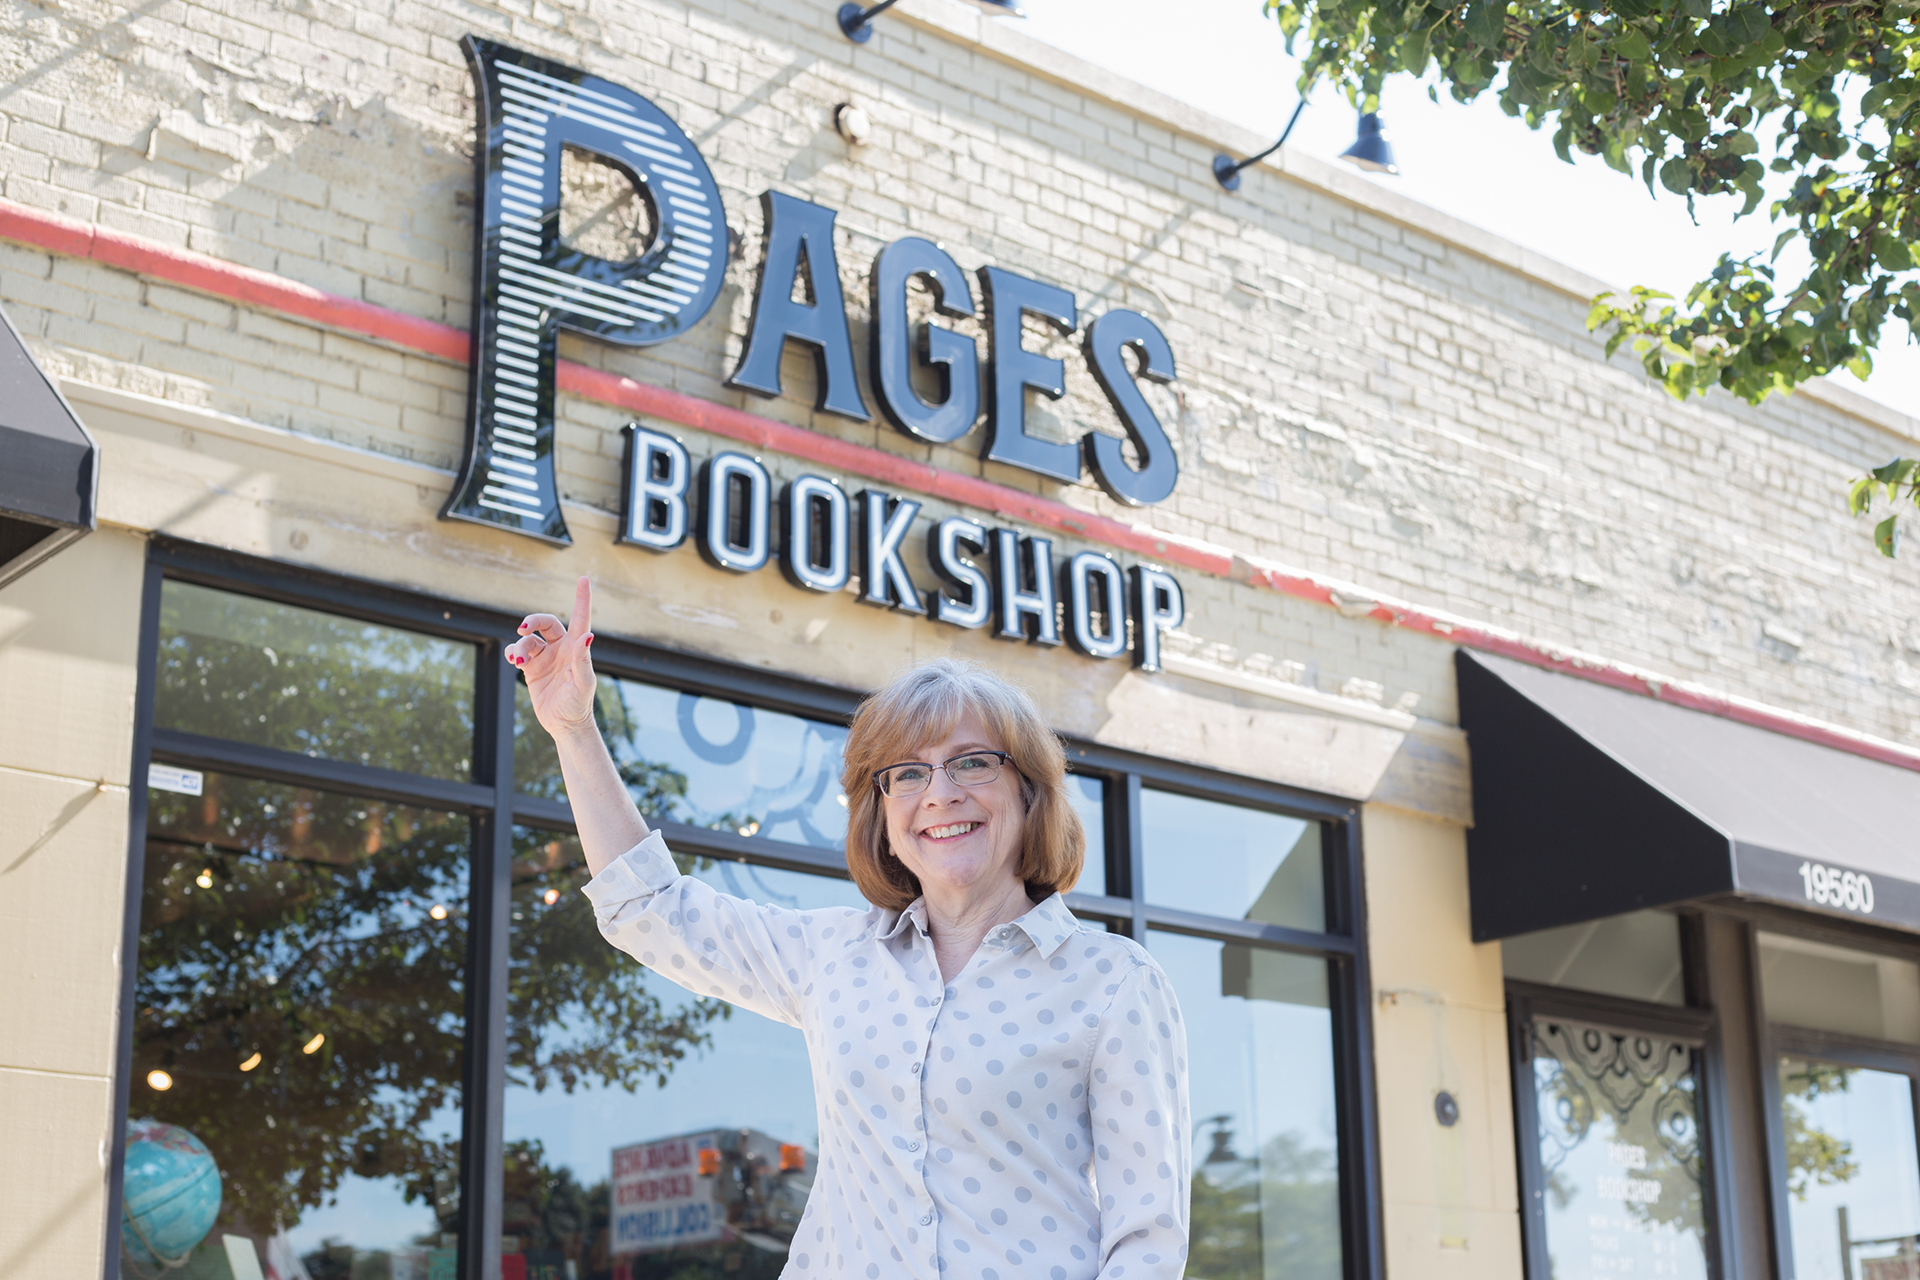 Susan Murphy – Founder of Pages Bookshop